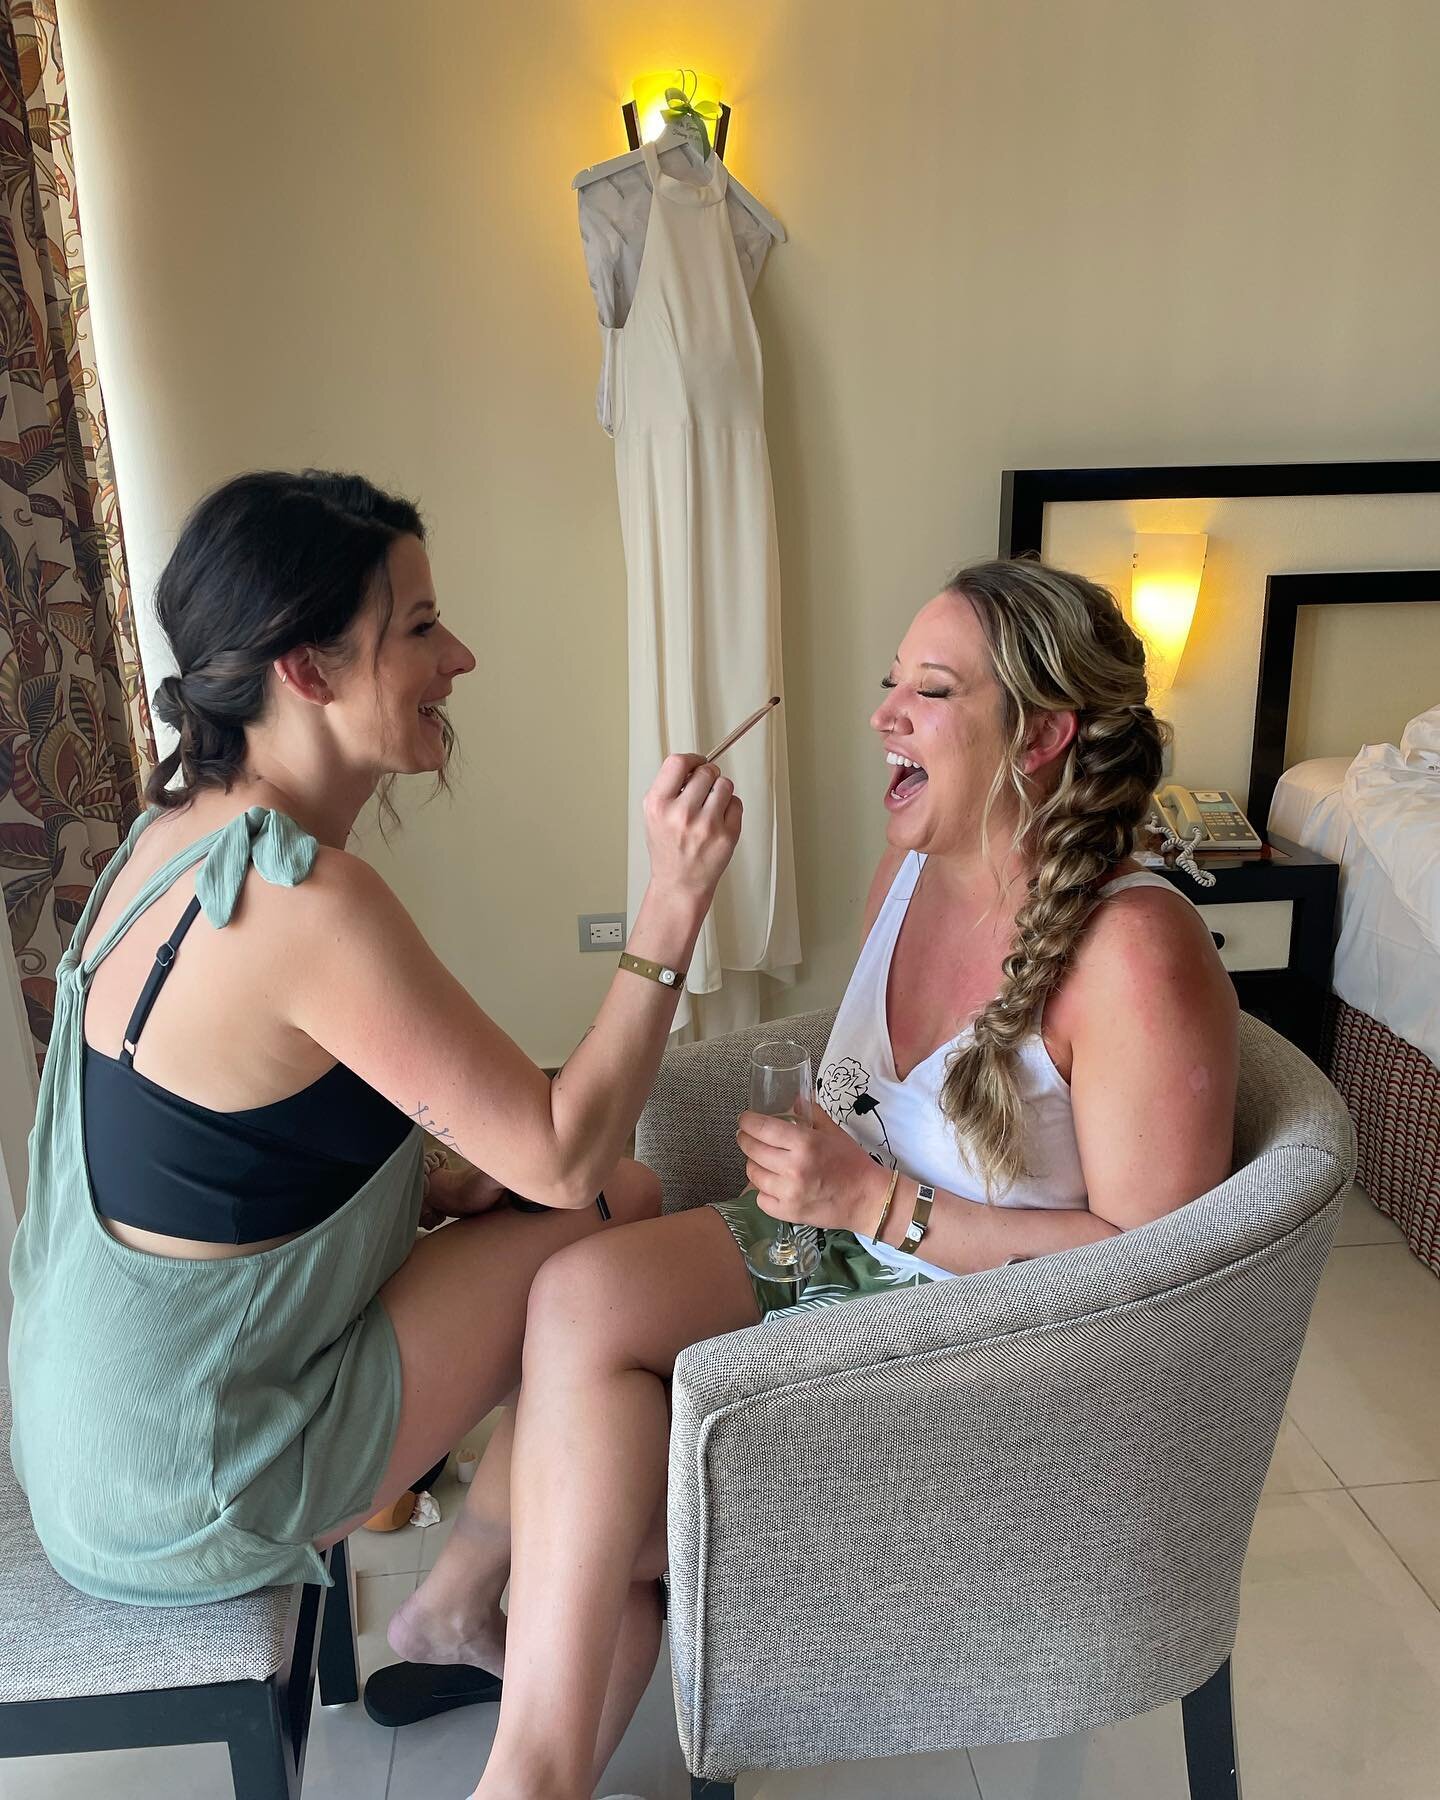 ✨About last week✨
MOH &amp; Stylist at your service

Getting my girl ready to marry her man ❤️ Happy 1 week anniversary @gio_is_hair and @_hairbysteph90_ 

#weddingstylist #bridalhair #bridalmakeup #MOH #chicagobride #chicagohairstylist #chicagostyli